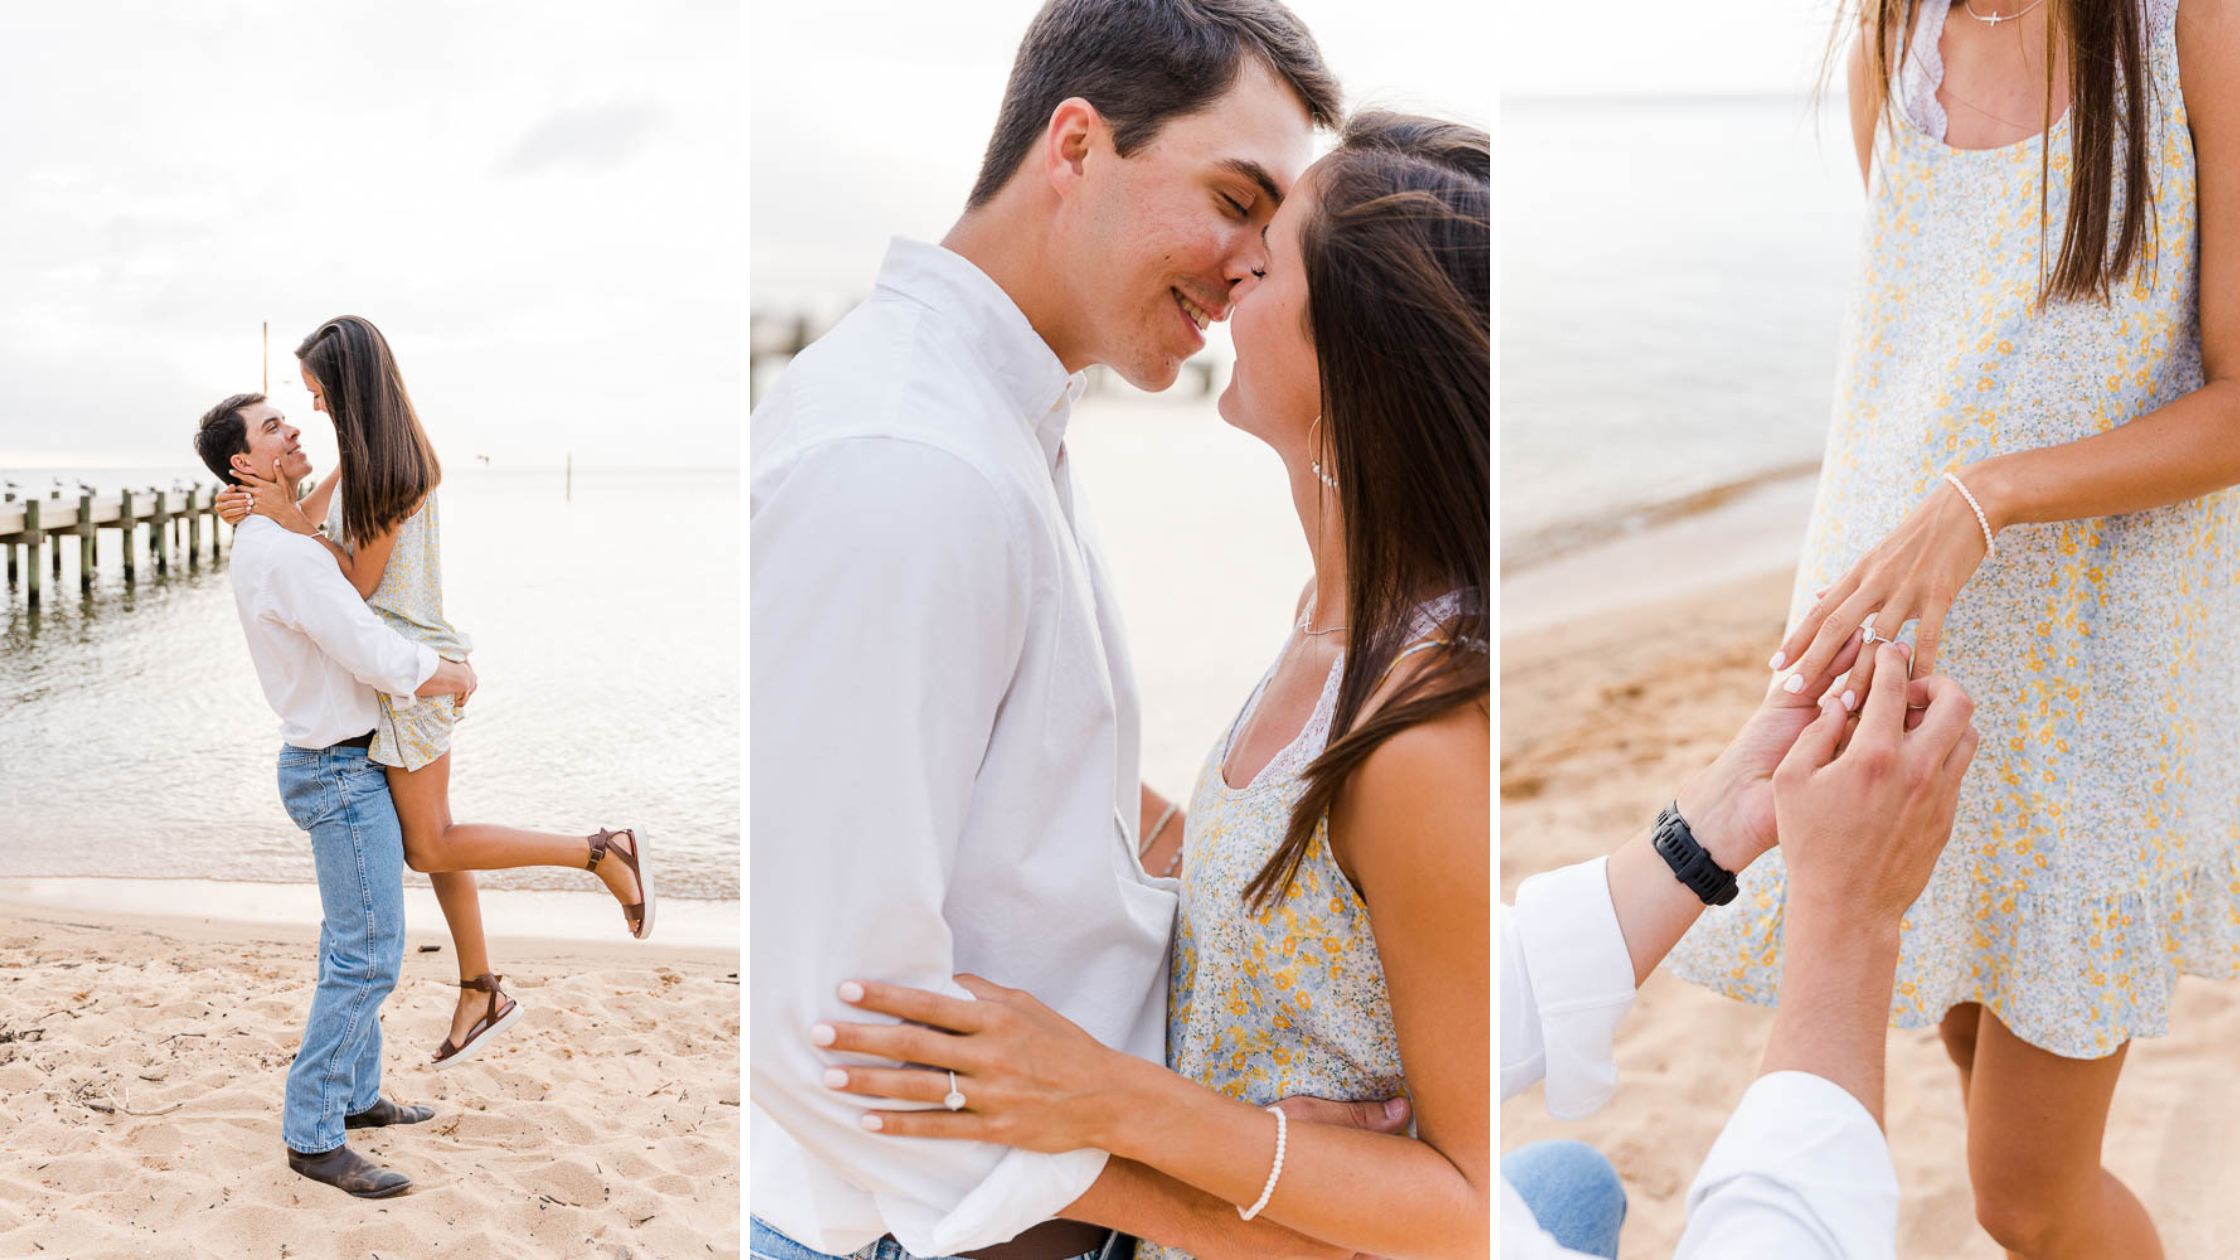 Fairhope Pier Proposal Photographed by Kristen Marcus Photography